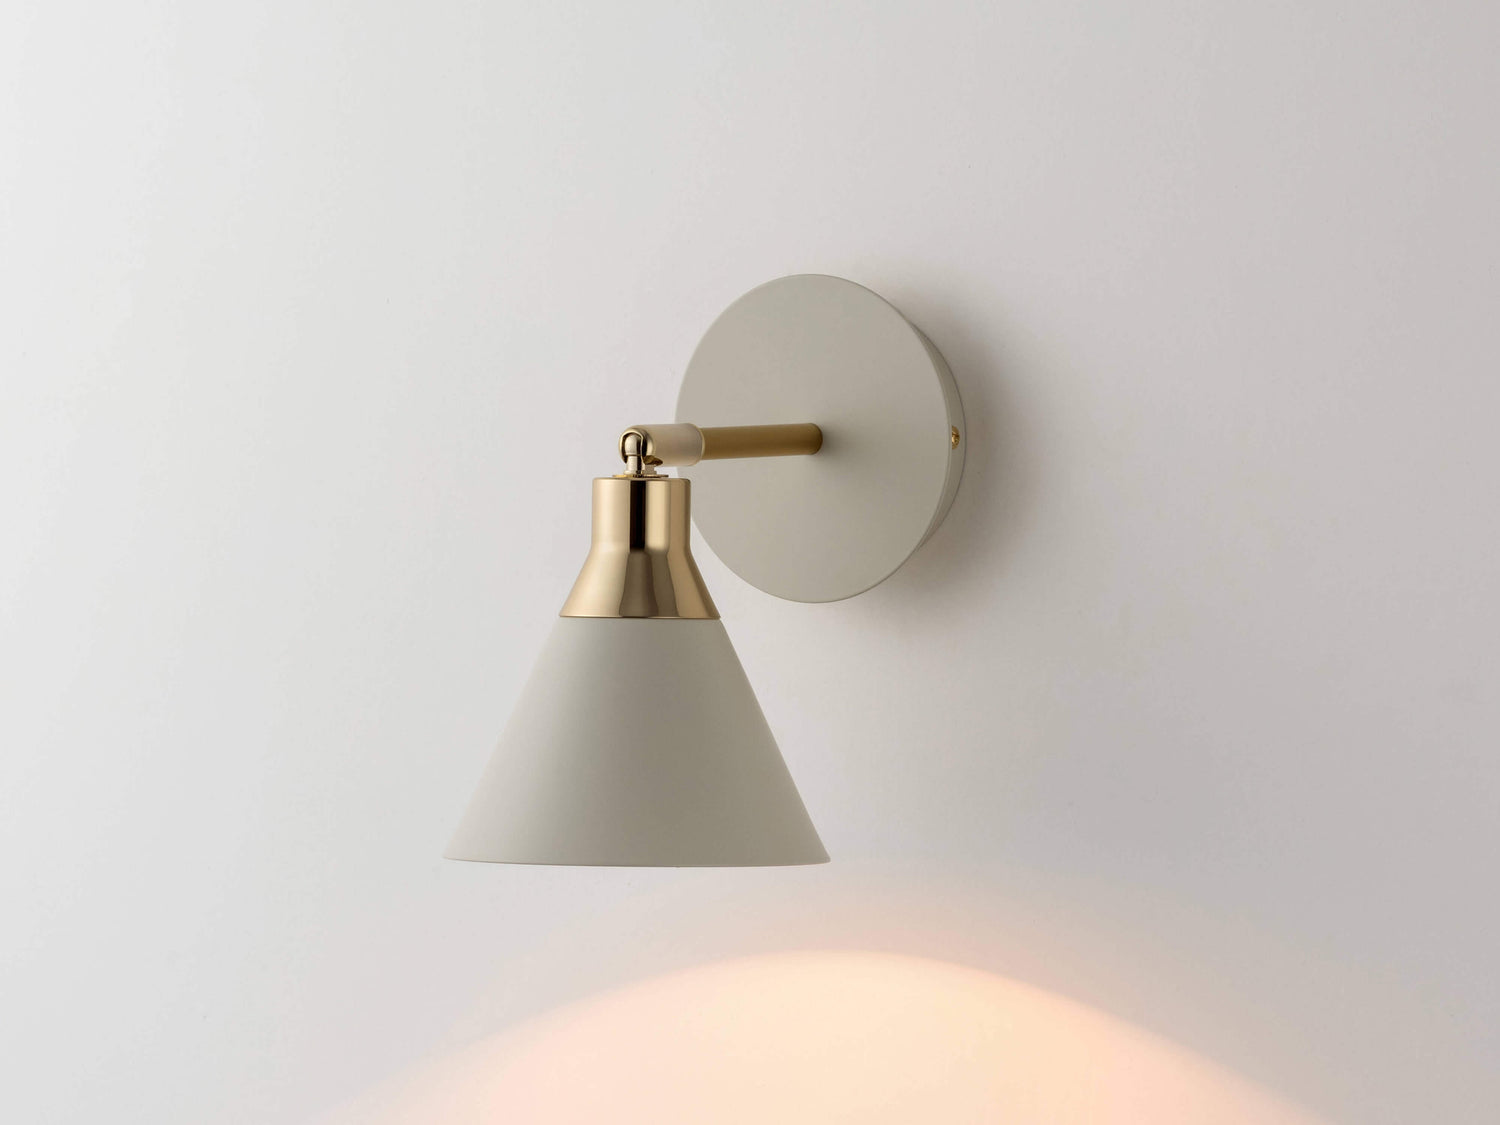 An adjustable sand metal cone shade is attached to a sand wall fixture with brass cap details. Light is on.